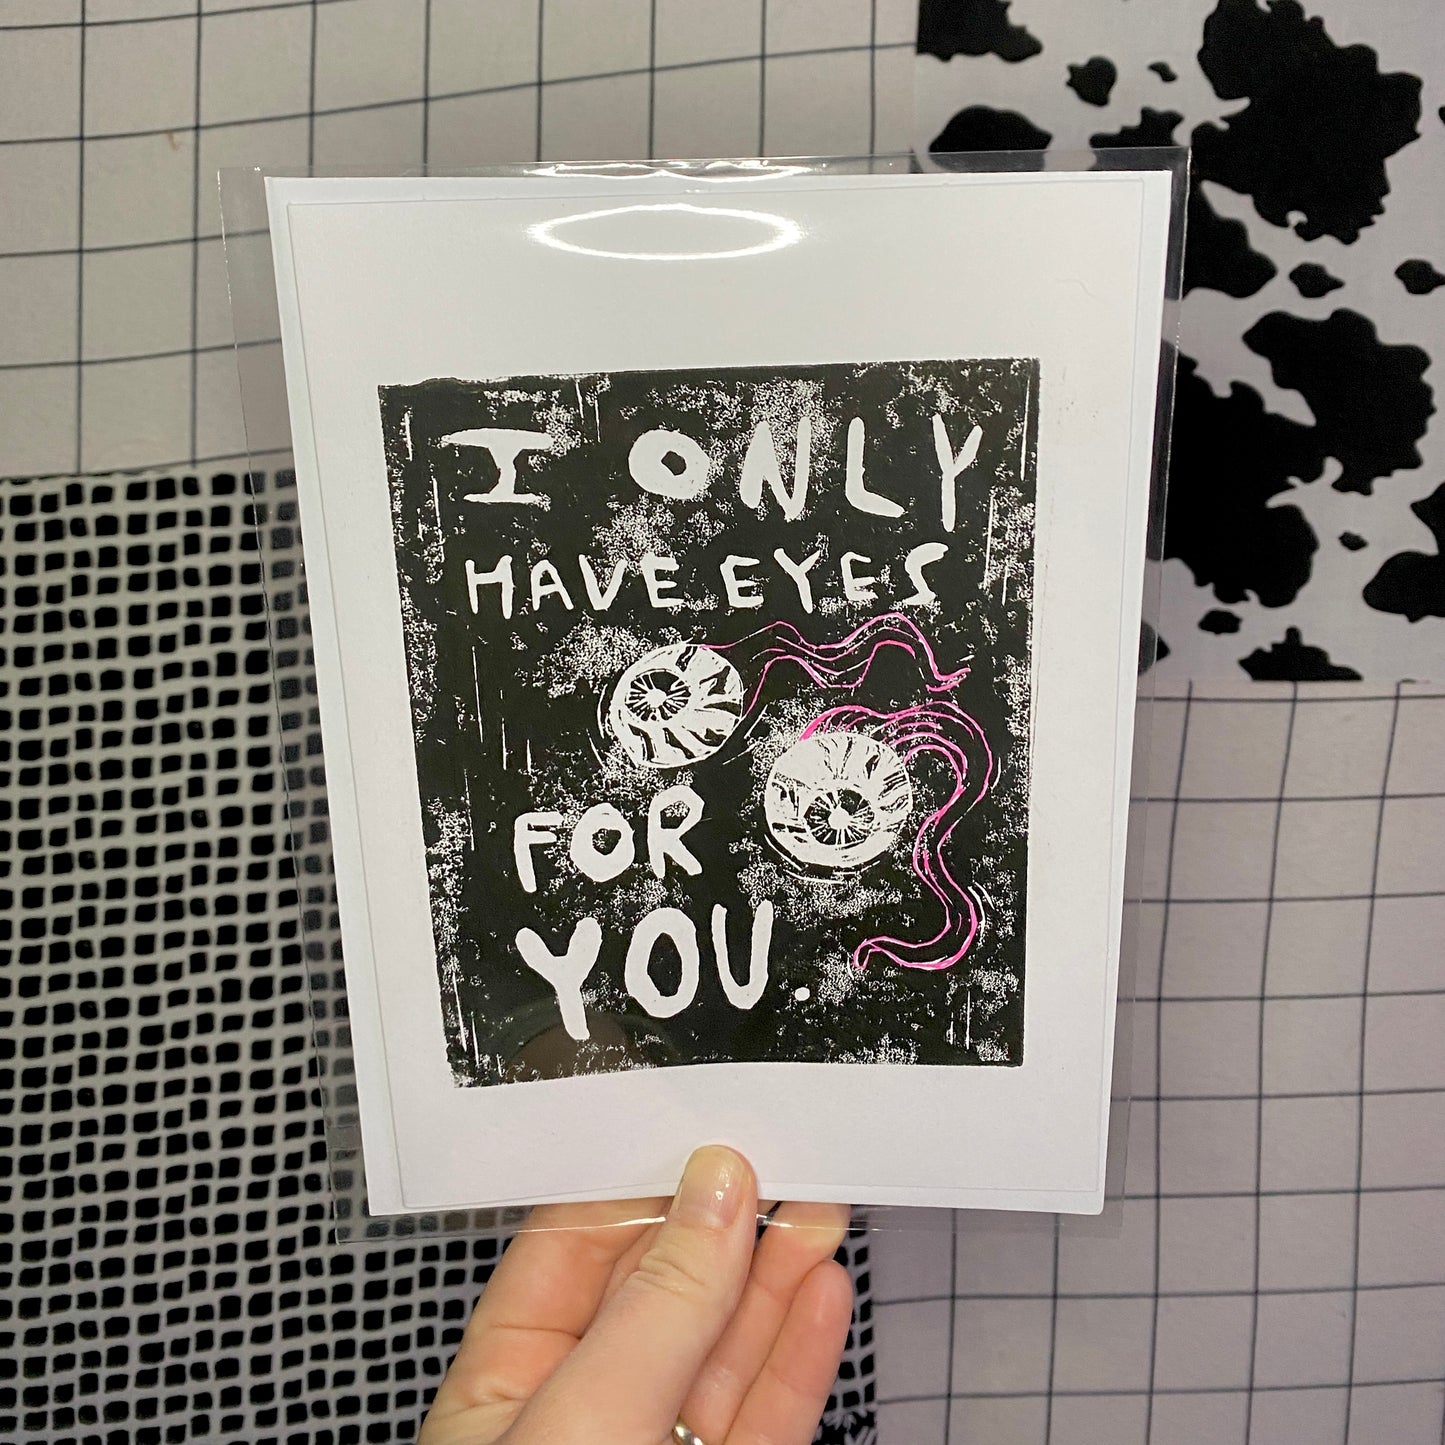 Creepy Love Letters | Relief Printed Linocut | Blank Greeting Cards with Envelope